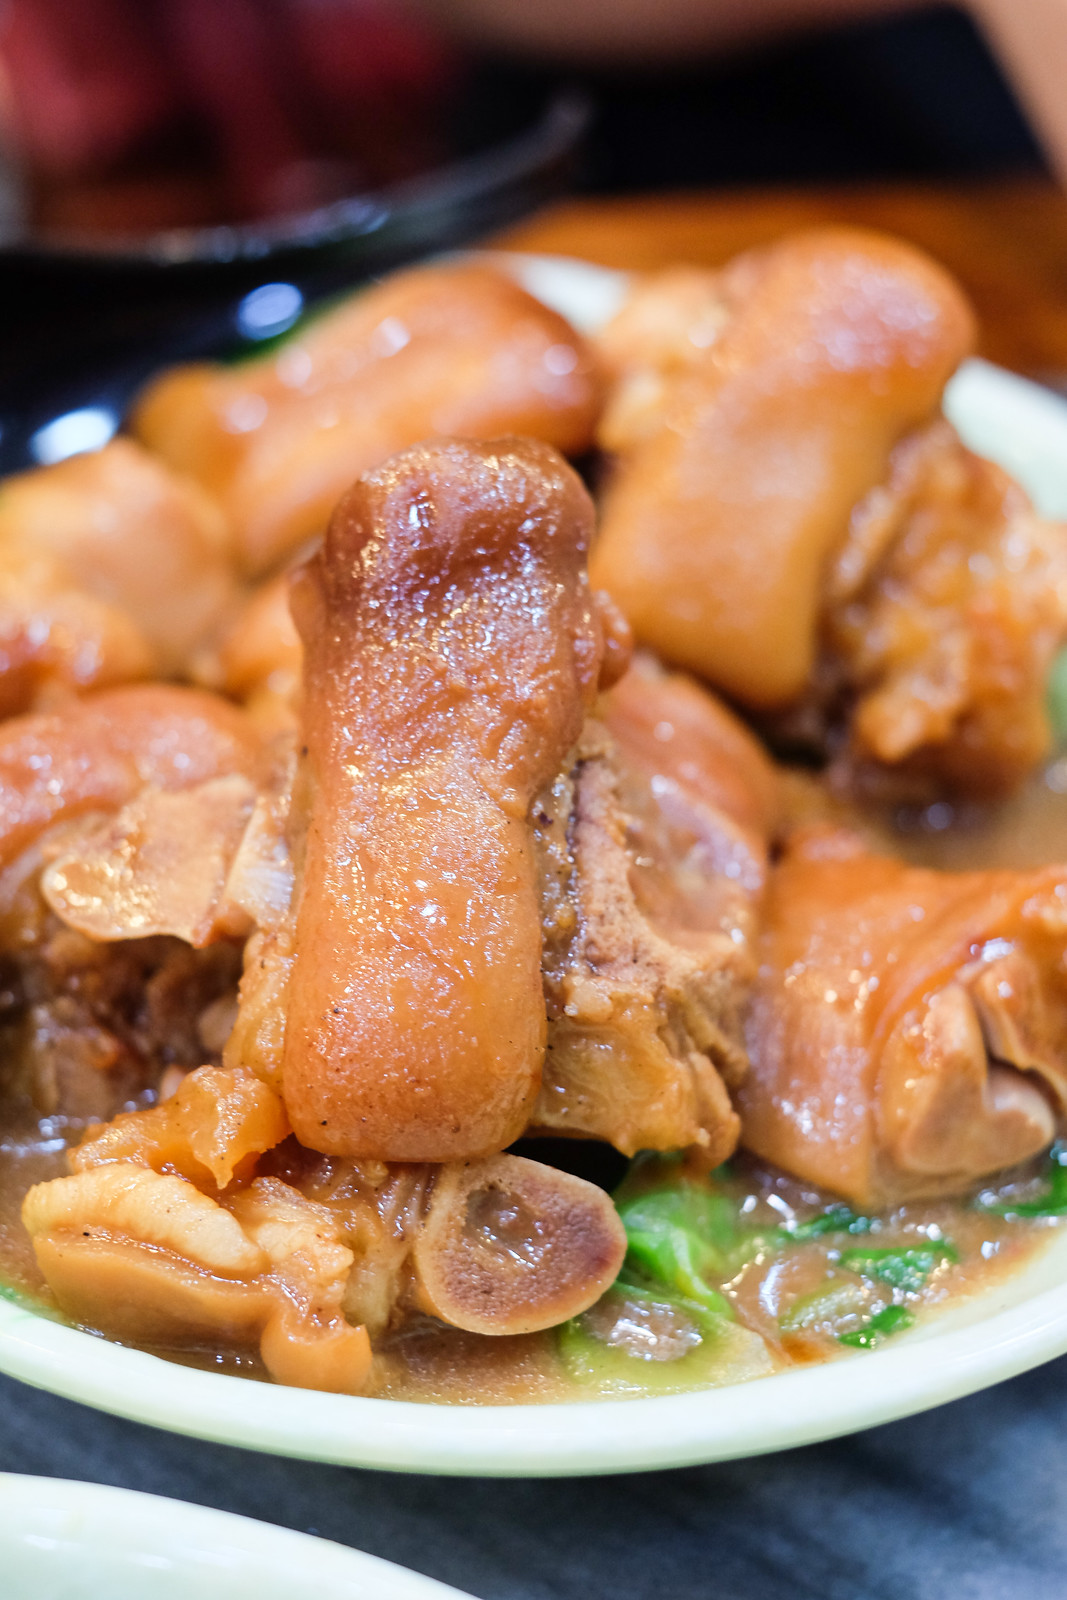 Kwan Kee Bamboo Noodle Hong Kong (坤記竹昇麵). Pig Trotters in Nam Yue Sauce